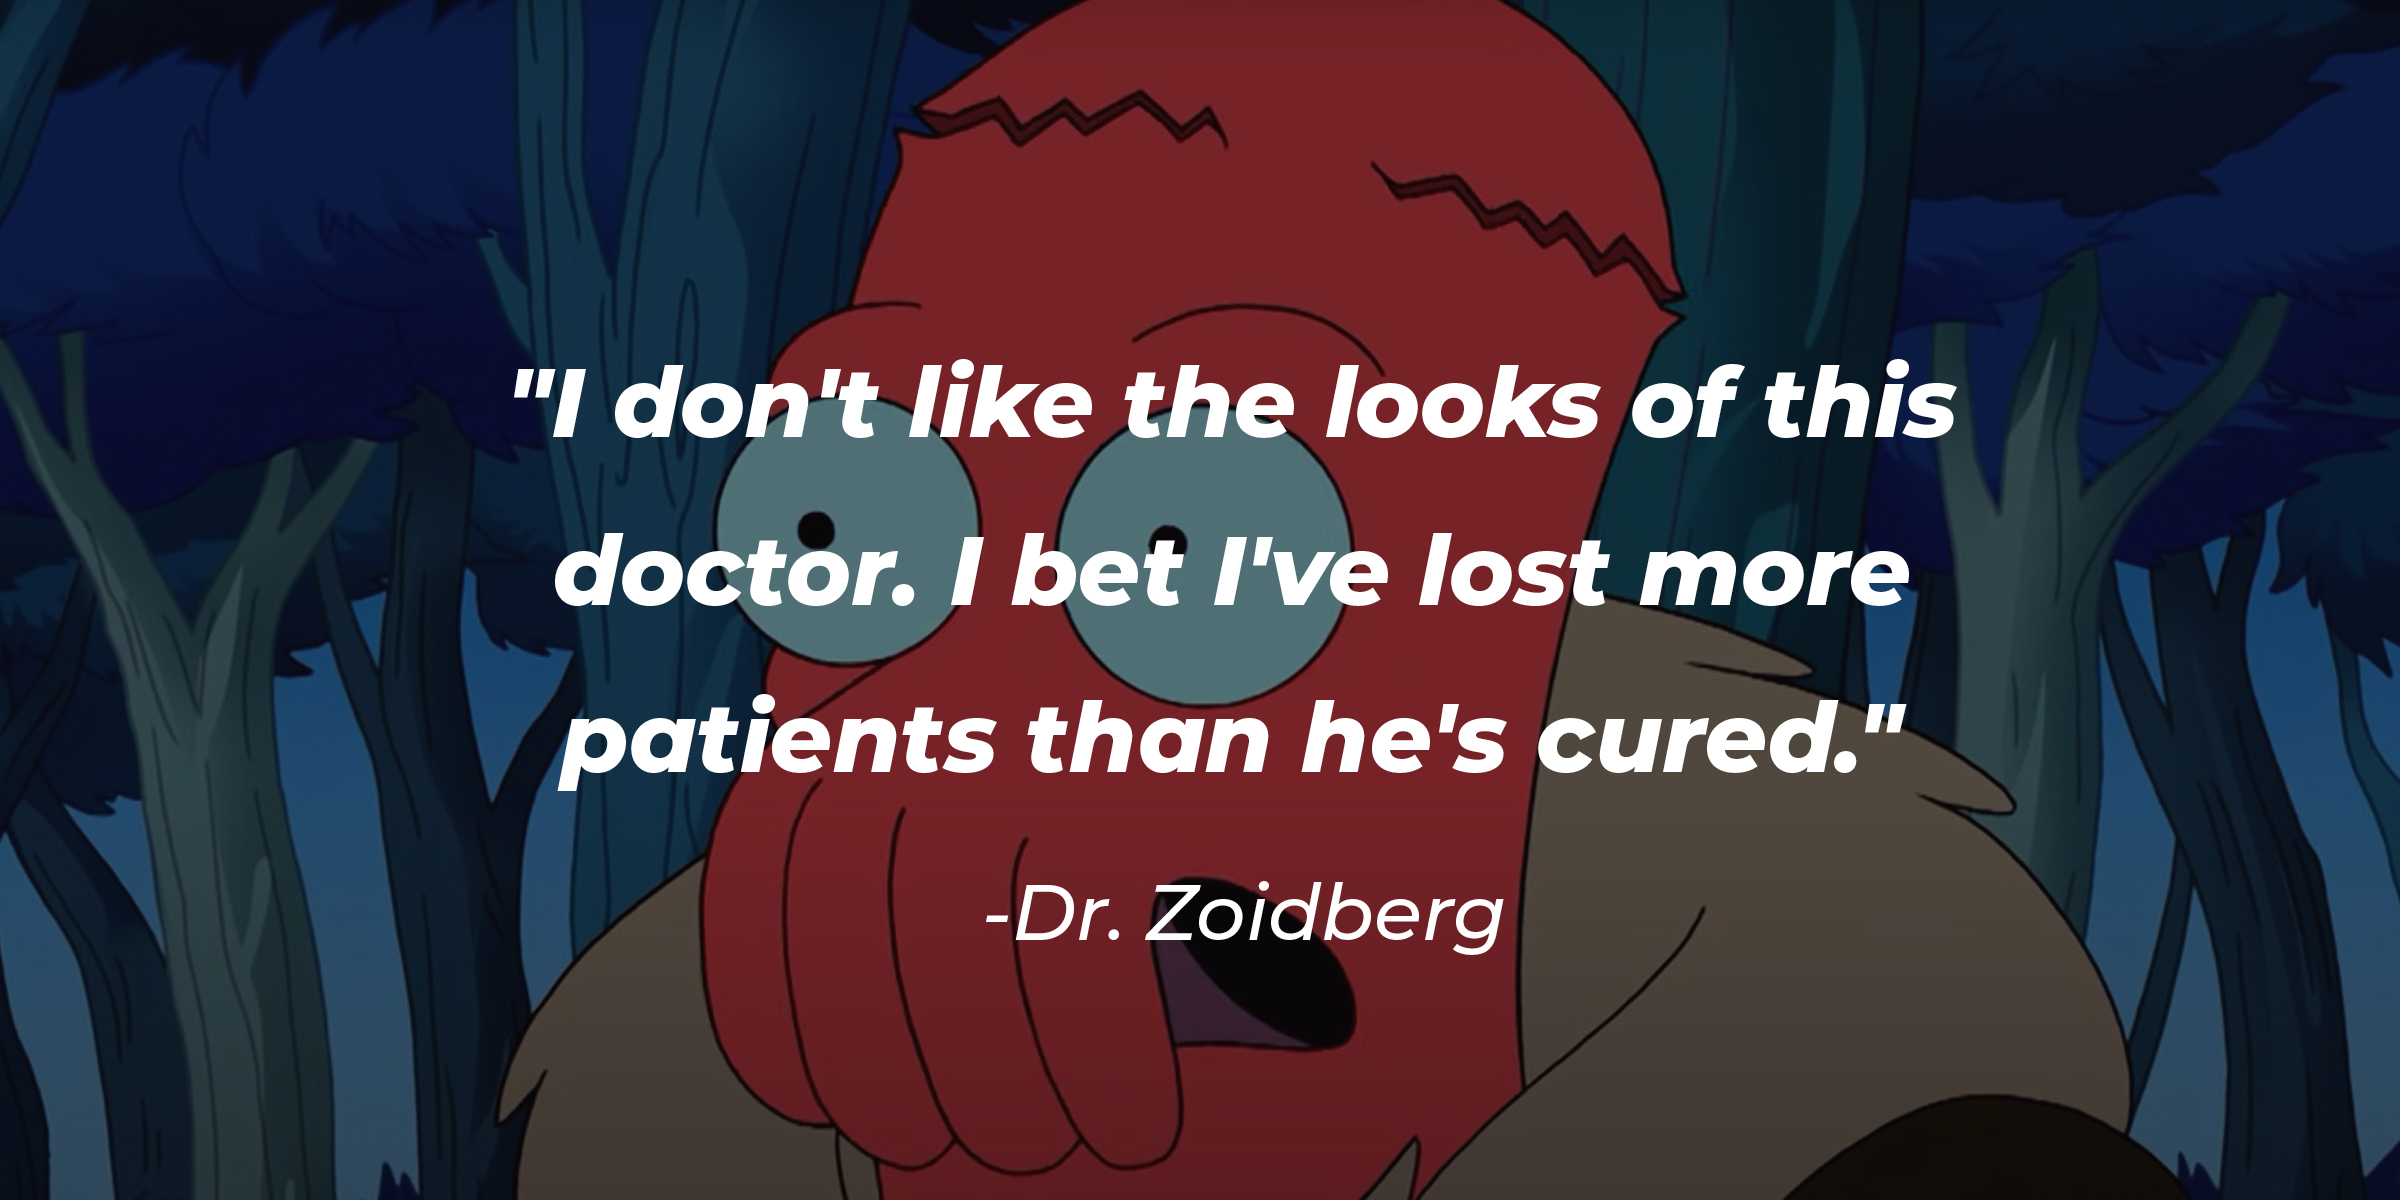 Photo of Dr. Zoidberg with the quote: "I don't like the looks of this doctor. I bet I've lost more patients than he's cured." | Source: Facebook.com/Futurama